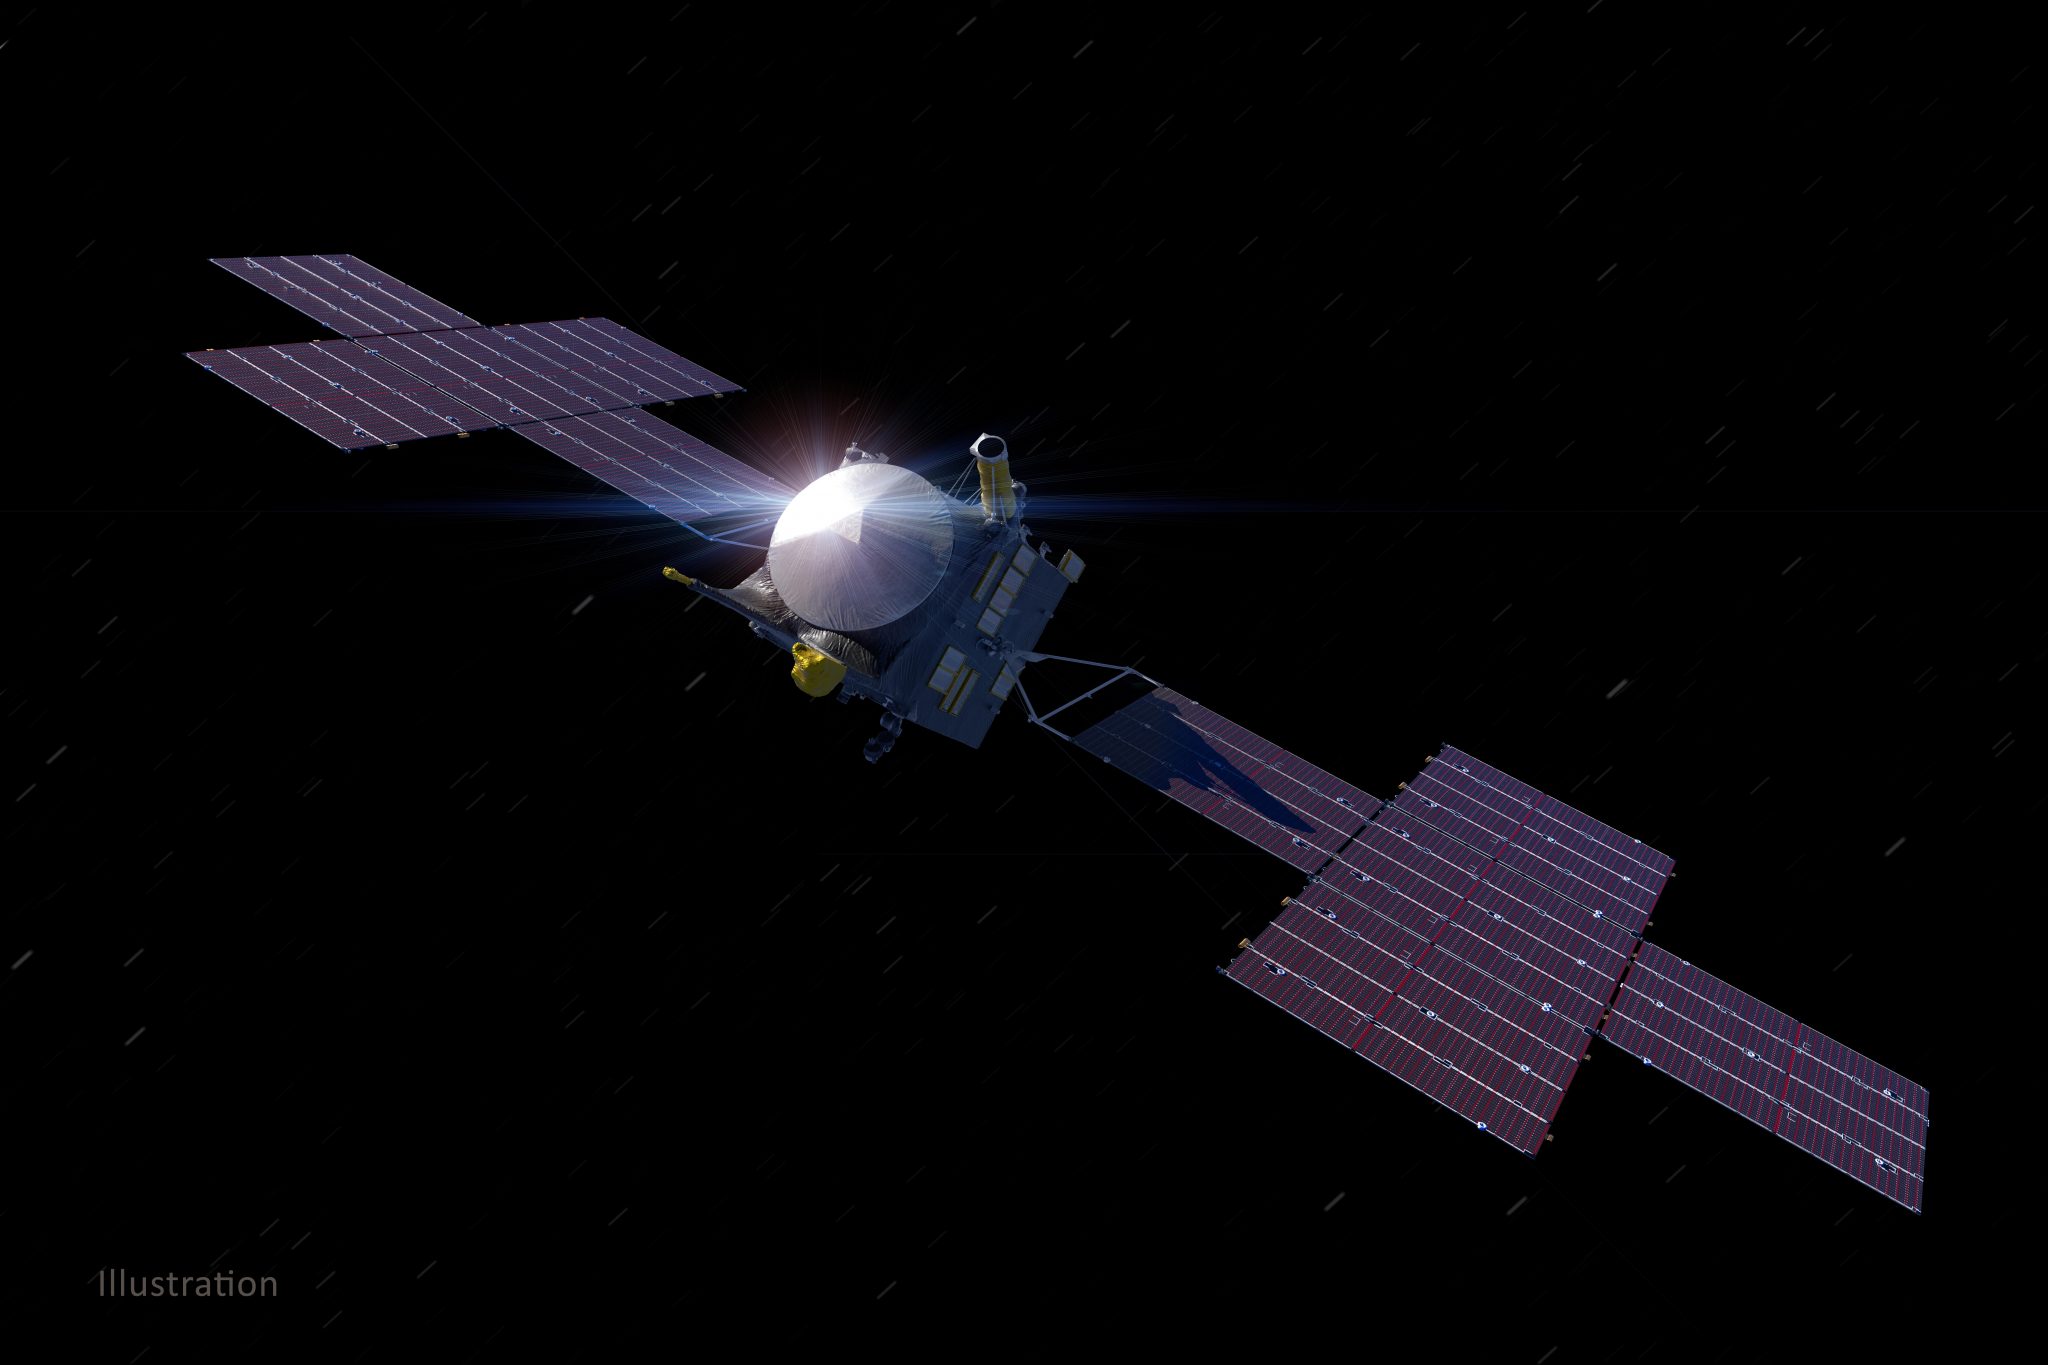 An illustration shows the Psyche spacecraft in space with its two plus-sign shaped solar panels extended on each side.